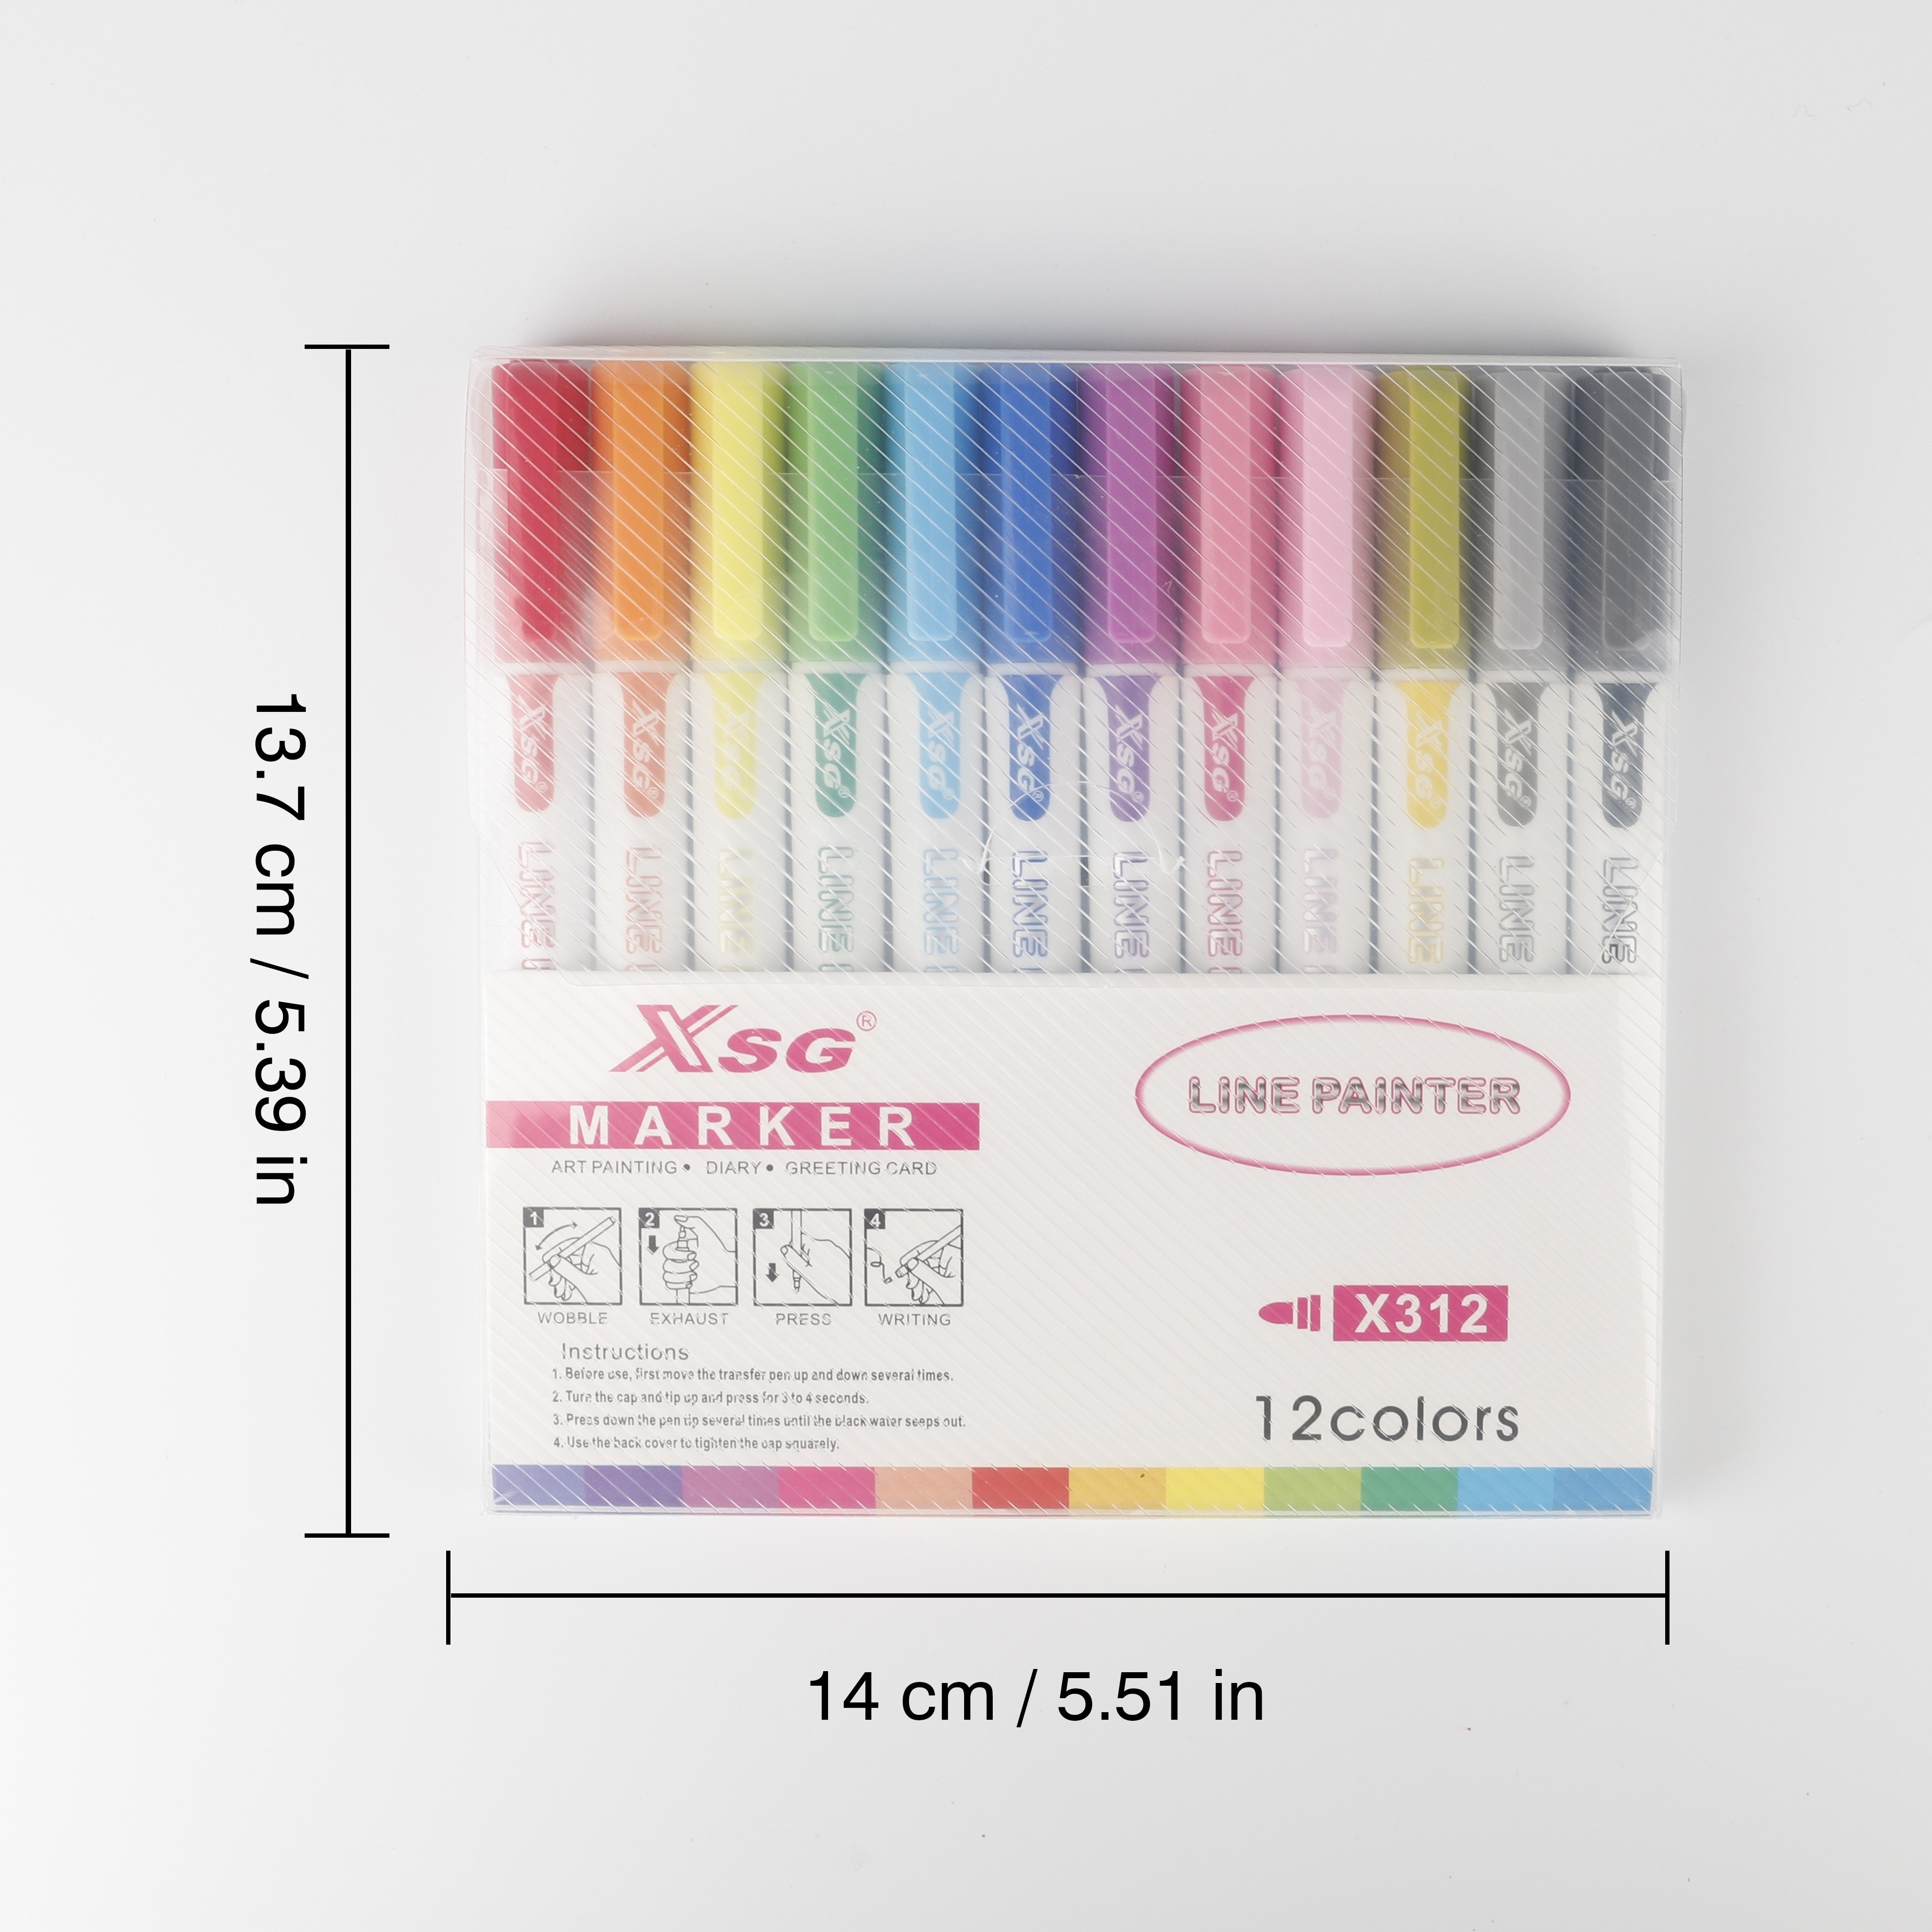 Super Squiggles Outline Markers,Shimmer Markers Set of 12, Super Squiggles Markers for Photo Album, Scrapbook Album, Greeting Card Making and Kids